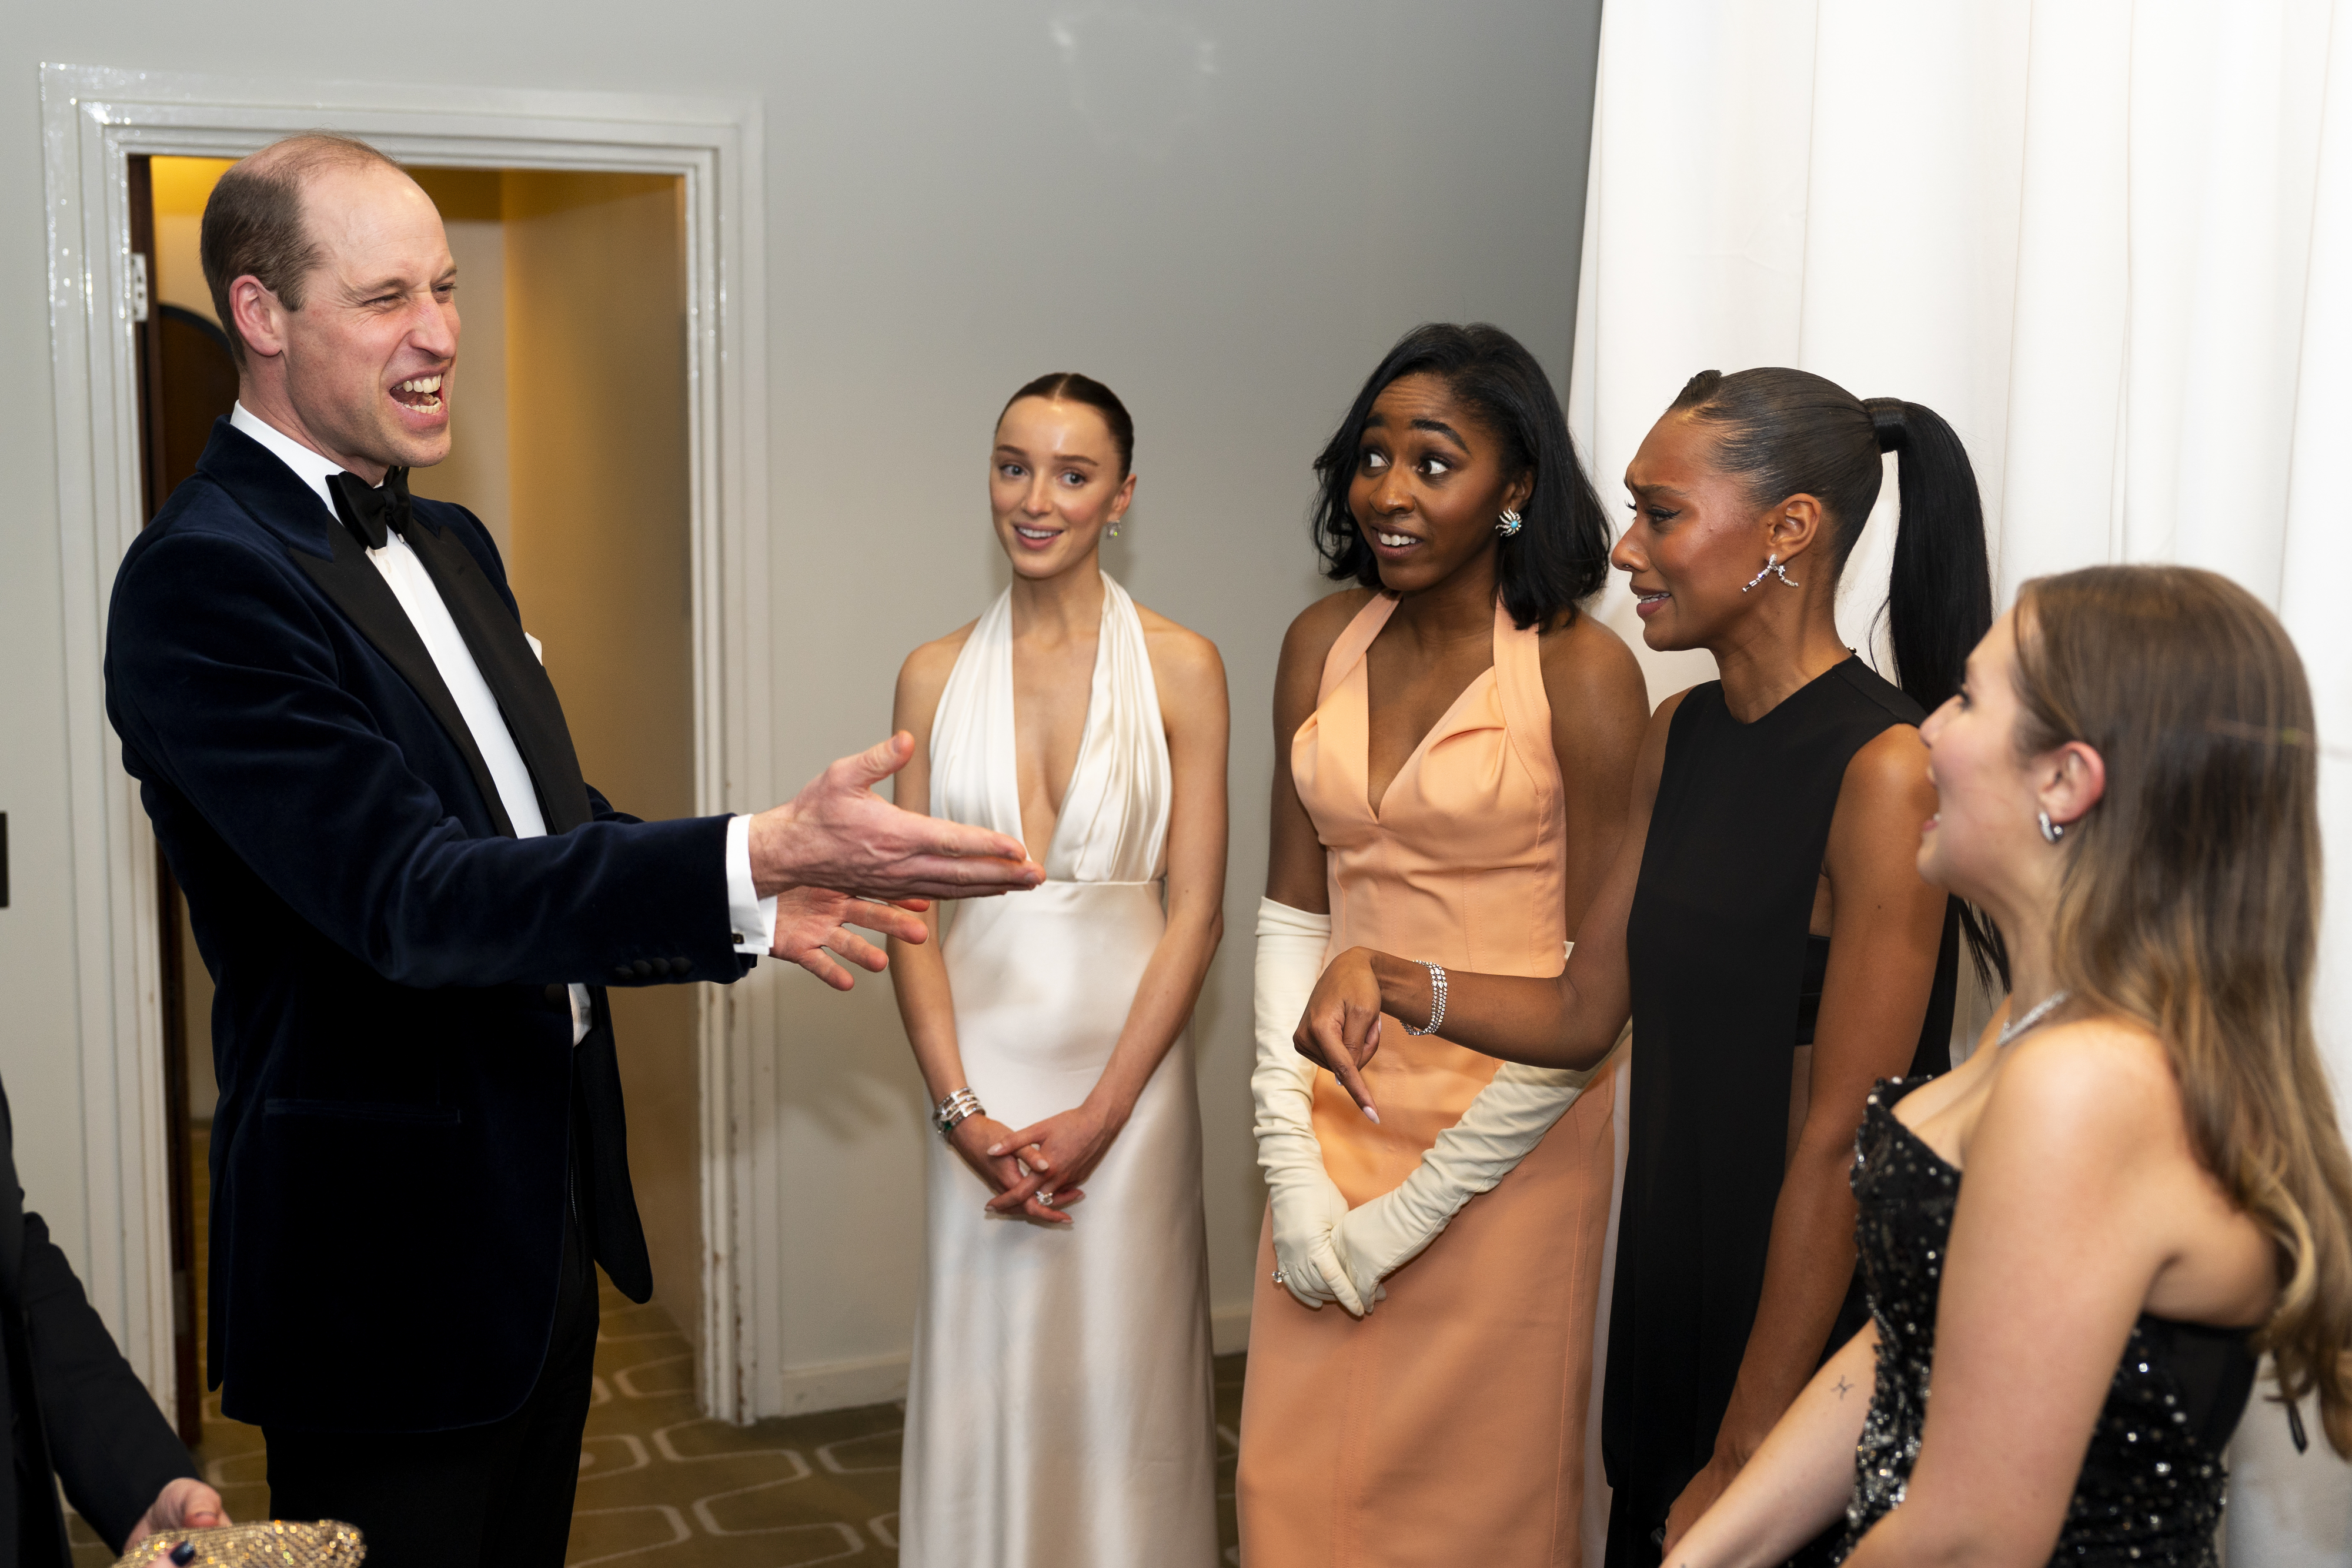 Four women in elegant evening wear interact with a man in a tuxedo at a formal event